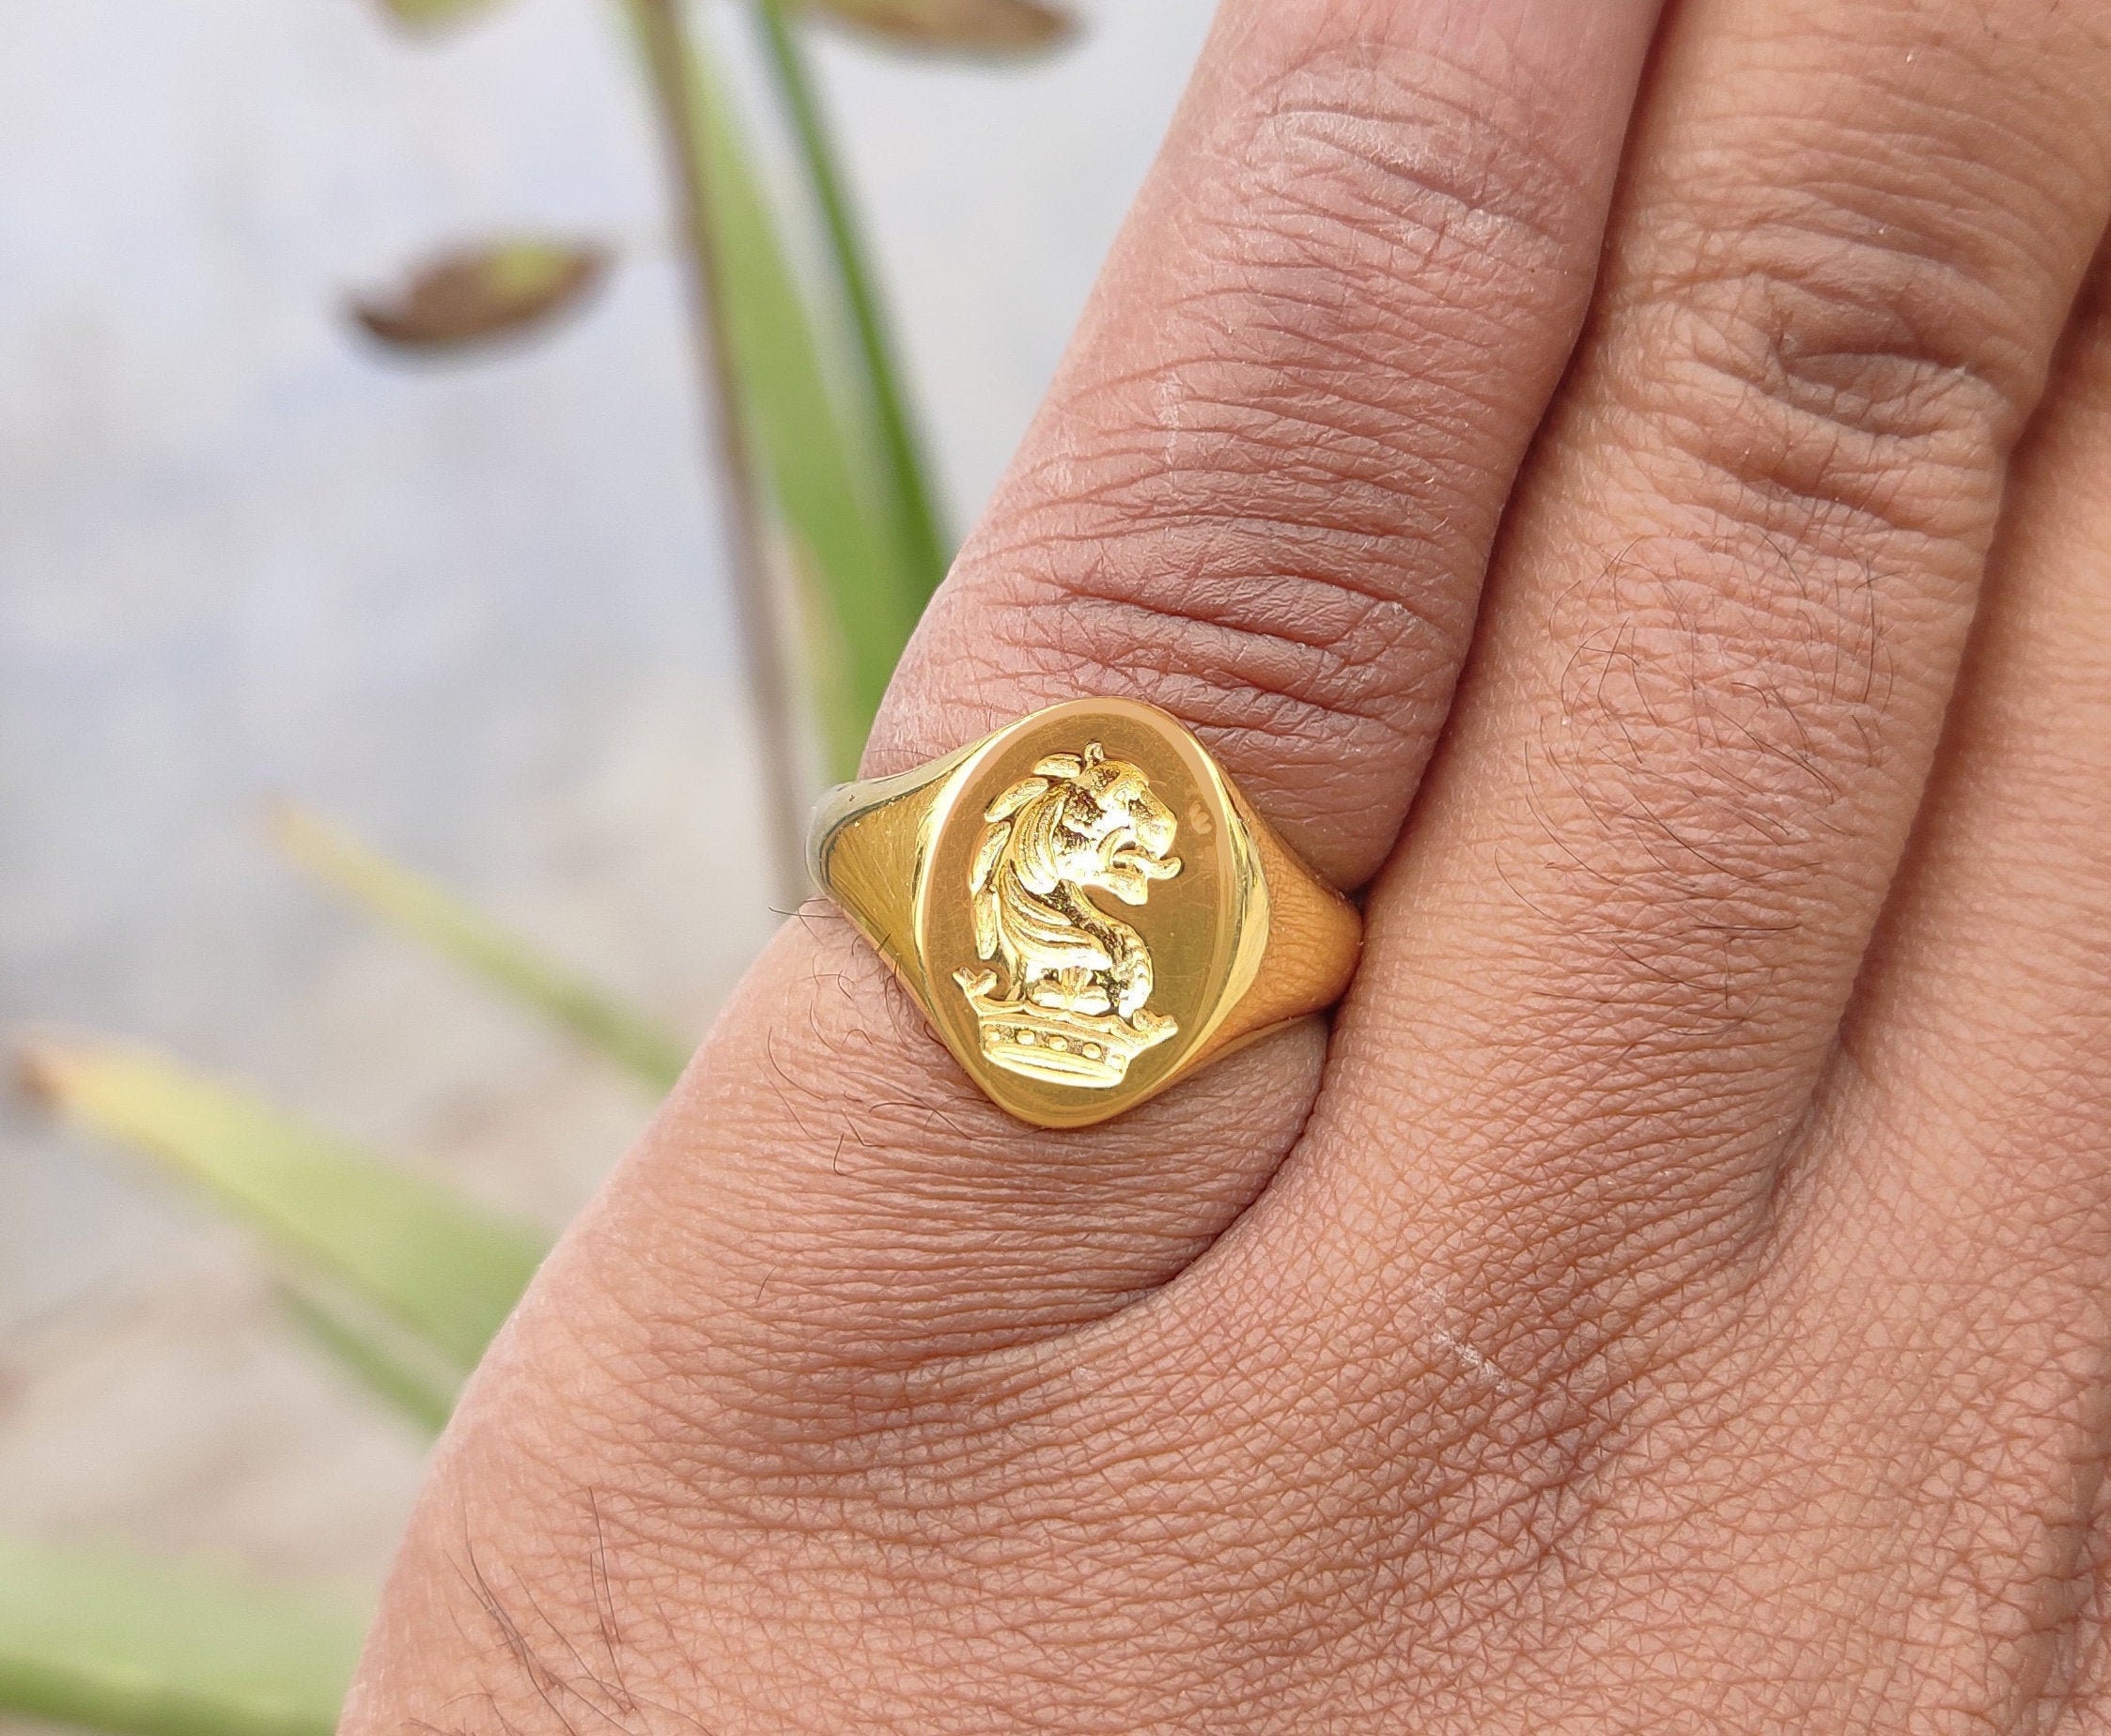 Buy Family Crest Signet Ring, Pinky Ring, Image Engraved, Personalized Ring,  Coat of Arms, Gold Round Seal, Handmade Jewelry, Class Ring Online in India  - Etsy